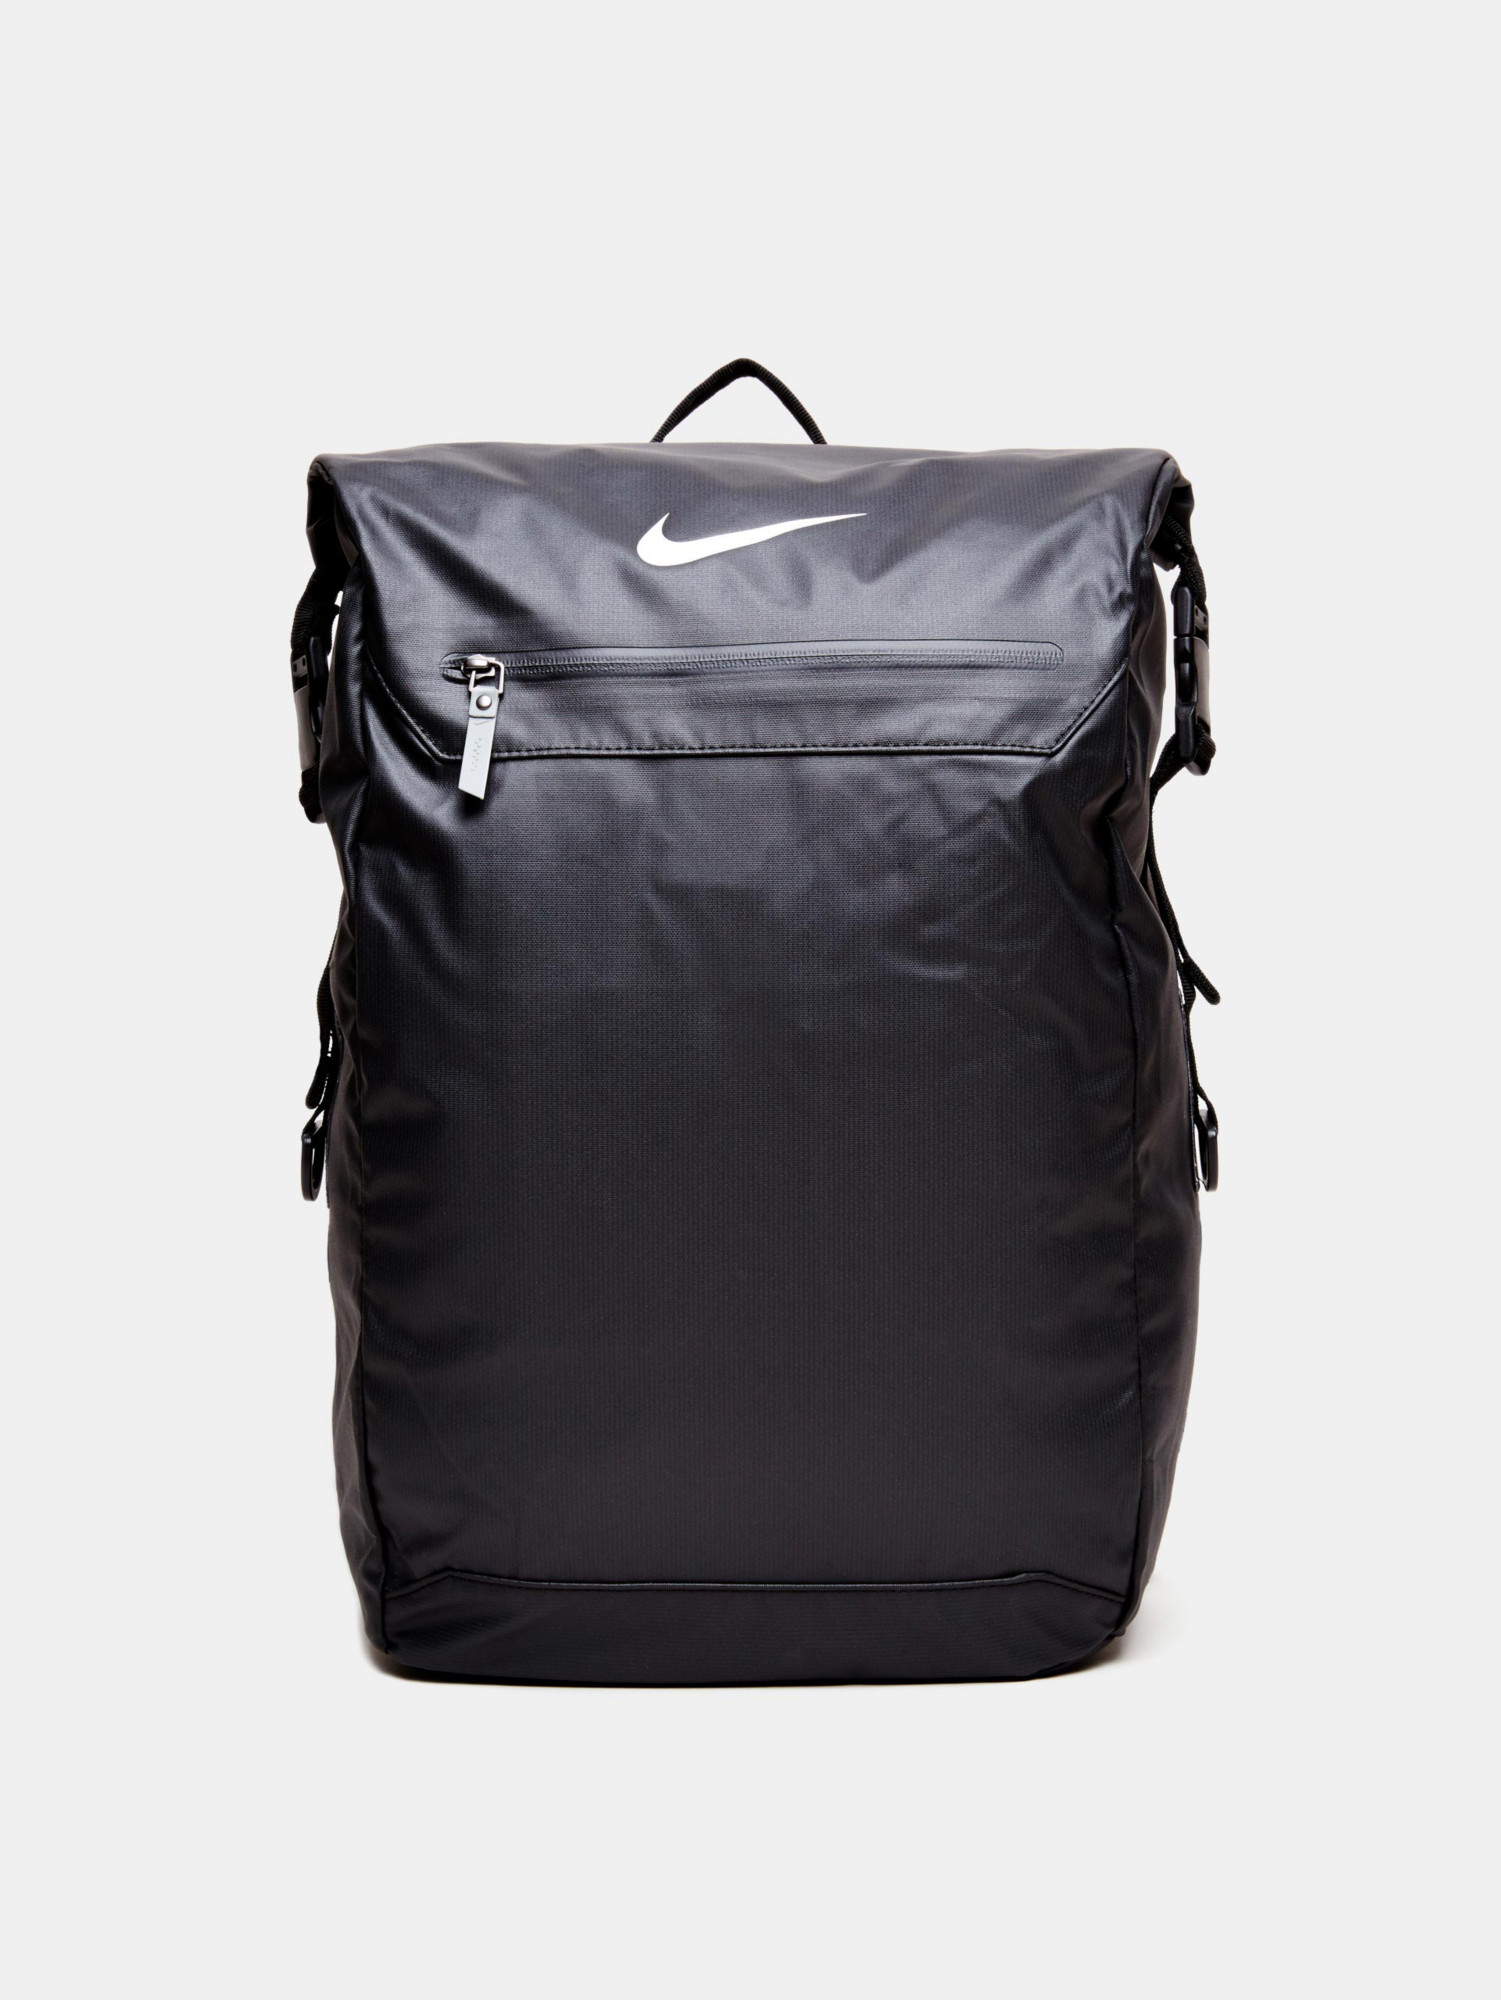 Very Goods | Nike Backpack - Without Walls